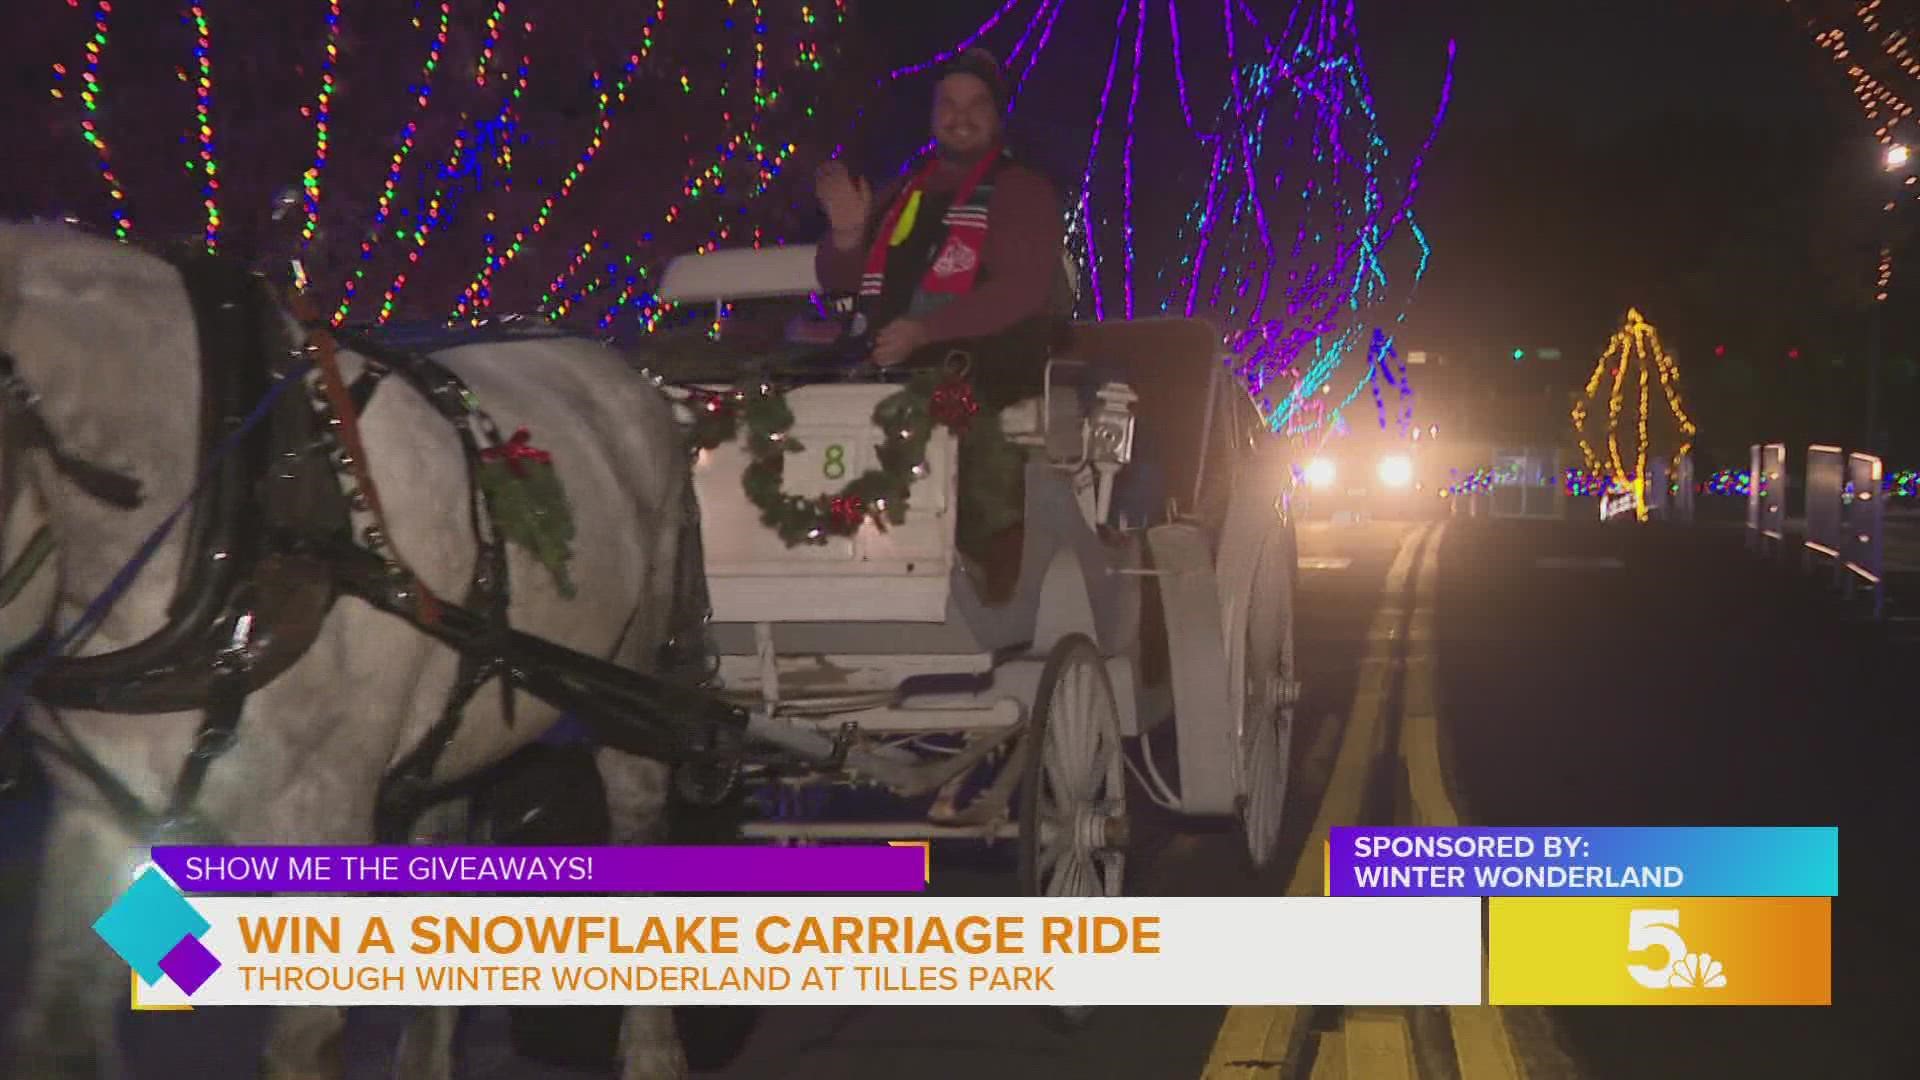 Two (2) winners will receive a private Snowflake Carriage ride on Wednesday, December 28 at Tilles Park.